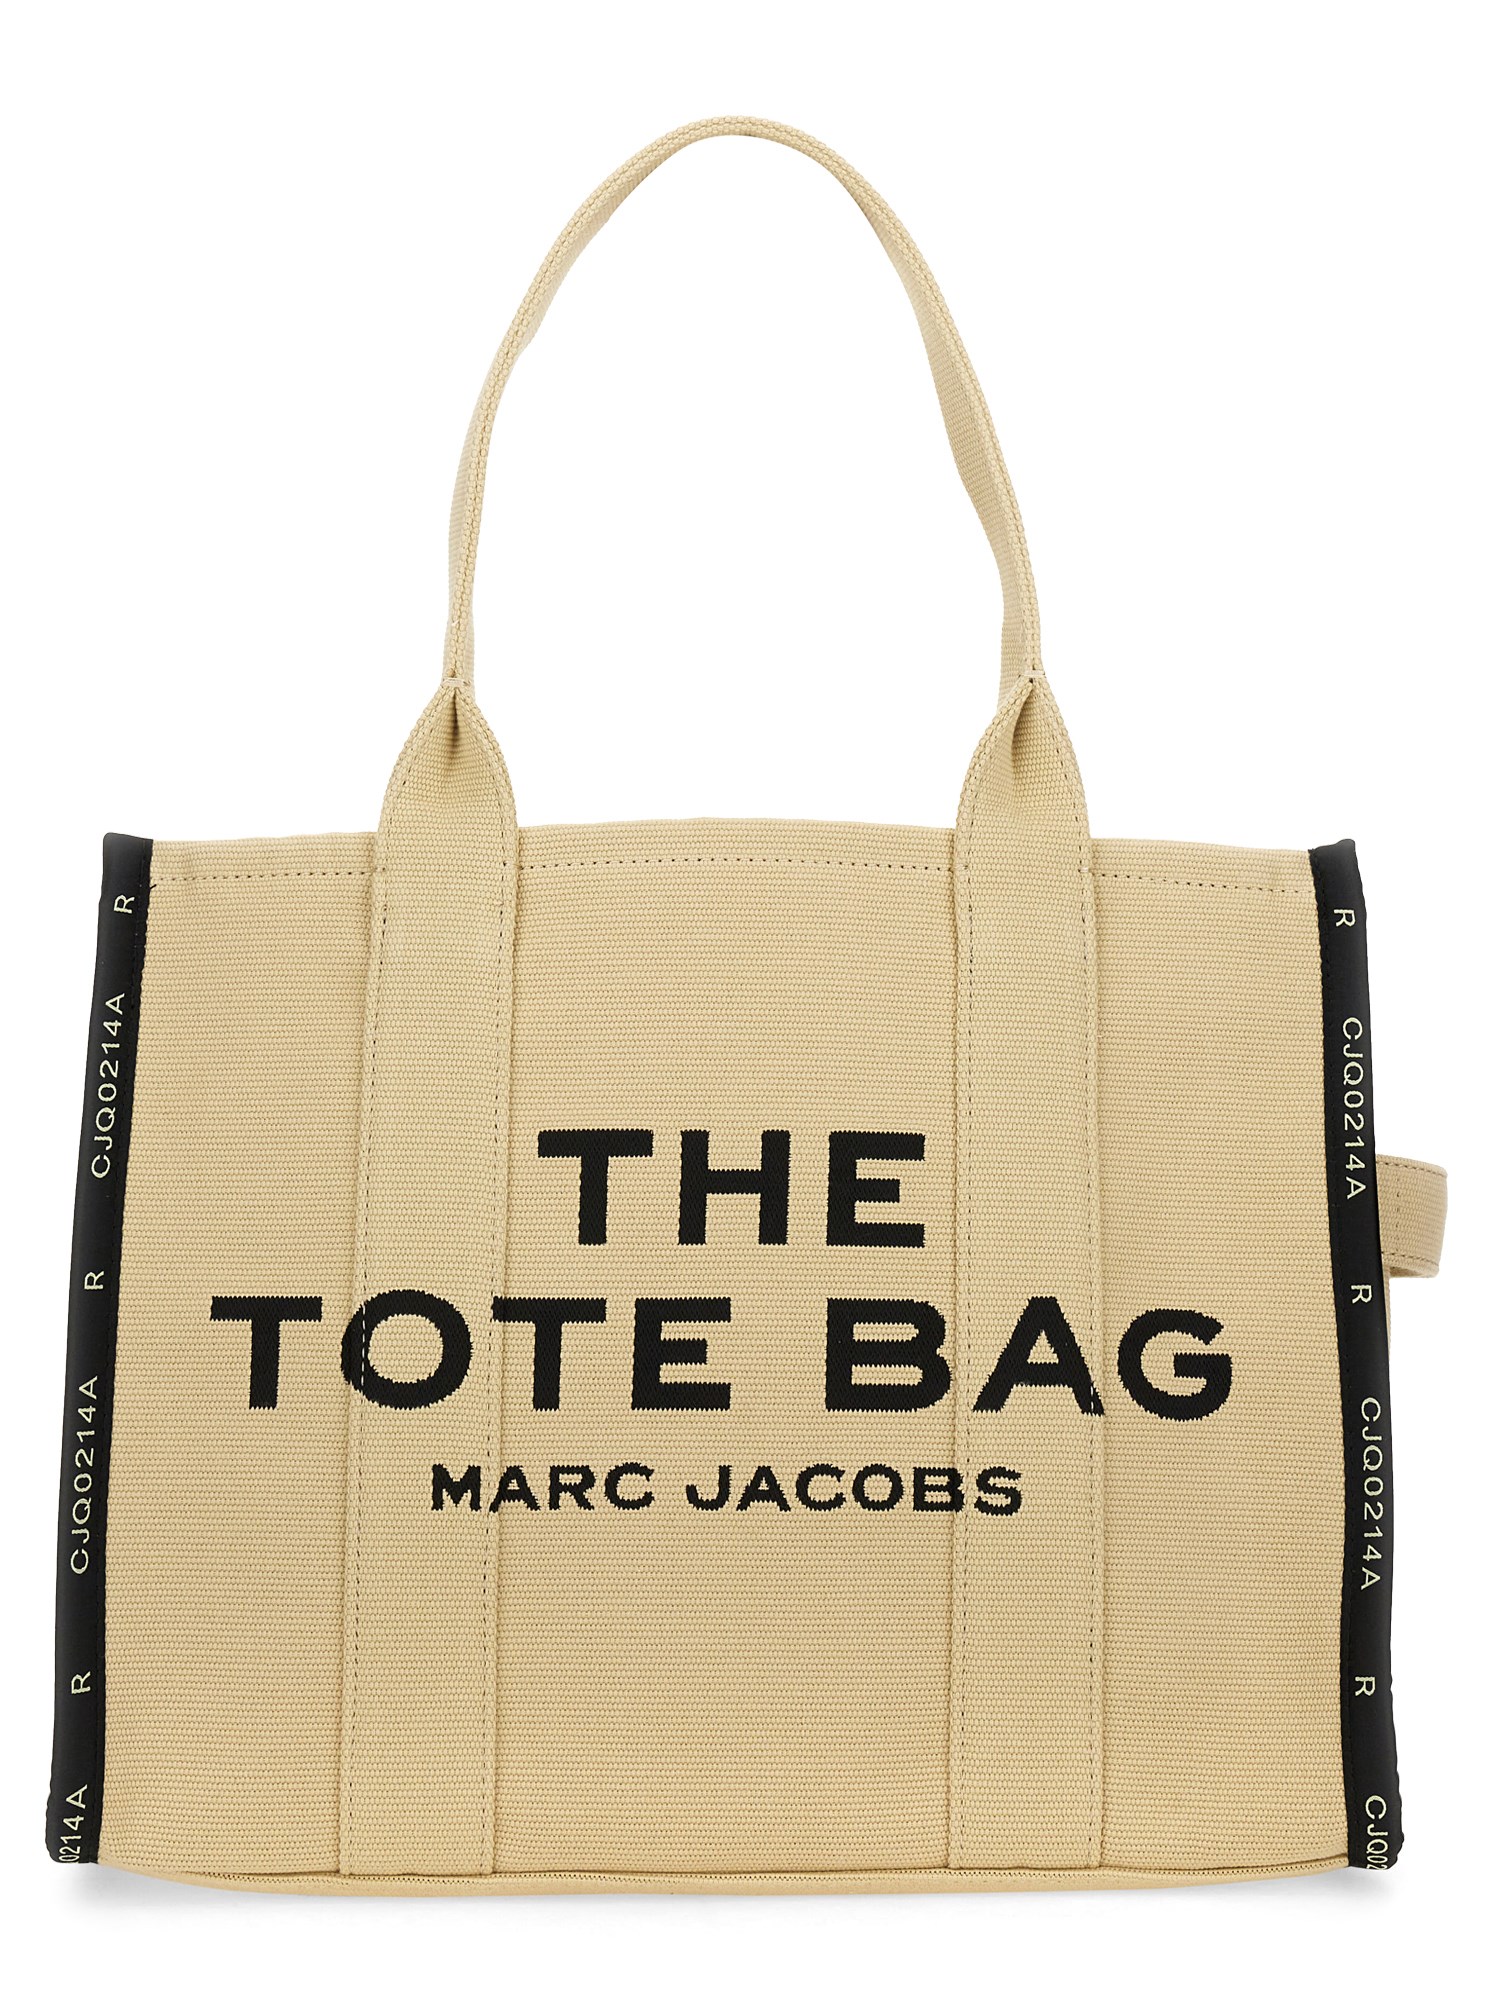 Marc Jacobs "the Tote" Large Bag In Neutral